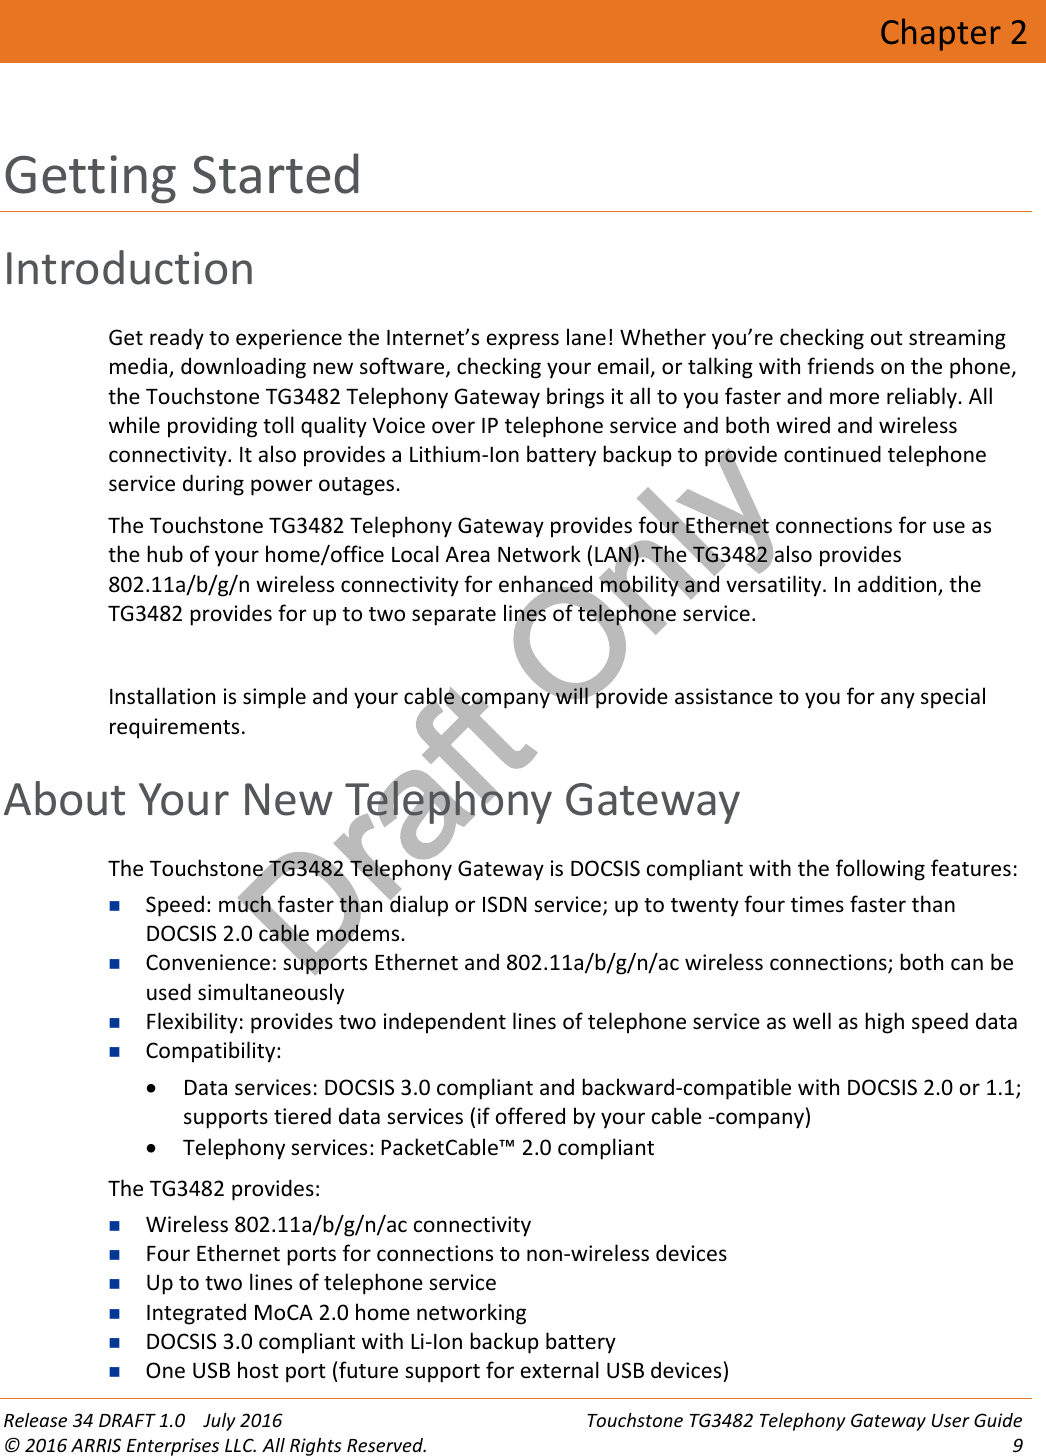 Draft OnlyRelease 34 DRAFT 1.0 July 2016 Touchstone TG3482 Telephony Gateway User Guide© 2016 ARRIS Enterprises LLC. All Rights Reserved. 9Chapter 2Getting StartedIntroductionGet ready to experience the Internet’s express lane! Whether you’re checking out streamingmedia, downloading new software, checking your email, or talking with friends on the phone,the Touchstone TG3482 Telephony Gateway brings it all to you faster and more reliably. Allwhile providing toll quality Voice over IP telephone service and both wired and wirelessconnectivity. It also provides a Lithium-Ion battery backup to provide continued telephoneservice during power outages.The Touchstone TG3482 Telephony Gateway provides four Ethernet connections for use asthe hub of your home/office Local Area Network (LAN). The TG3482 also provides802.11a/b/g/n wireless connectivity for enhanced mobility and versatility. In addition, theTG3482 provides for up to two separate lines of telephone service.Installation is simple and your cable company will provide assistance to you for any specialrequirements.About Your New Telephony GatewayThe Touchstone TG3482 Telephony Gateway is DOCSIS compliant with the following features:Speed: much faster than dialup or ISDN service; up to twenty four times faster thanDOCSIS 2.0 cable modems.Convenience: supports Ethernet and 802.11a/b/g/n/ac wireless connections; both can beused simultaneouslyFlexibility: provides two independent lines of telephone service as well as high speed dataCompatibility:Data services: DOCSIS 3.0 compliant and backward-compatible with DOCSIS 2.0 or 1.1;supports tiered data services (if offered by your cable -company)Telephony services: PacketCable™ 2.0 compliant The TG3482 provides:Wireless 802.11a/b/g/n/ac connectivityFour Ethernet ports for connections to non-wireless devicesUp to two lines of telephone serviceIntegrated MoCA 2.0 home networkingDOCSIS 3.0 compliant with Li-Ion backup batteryOne USB host port (future support for external USB devices)